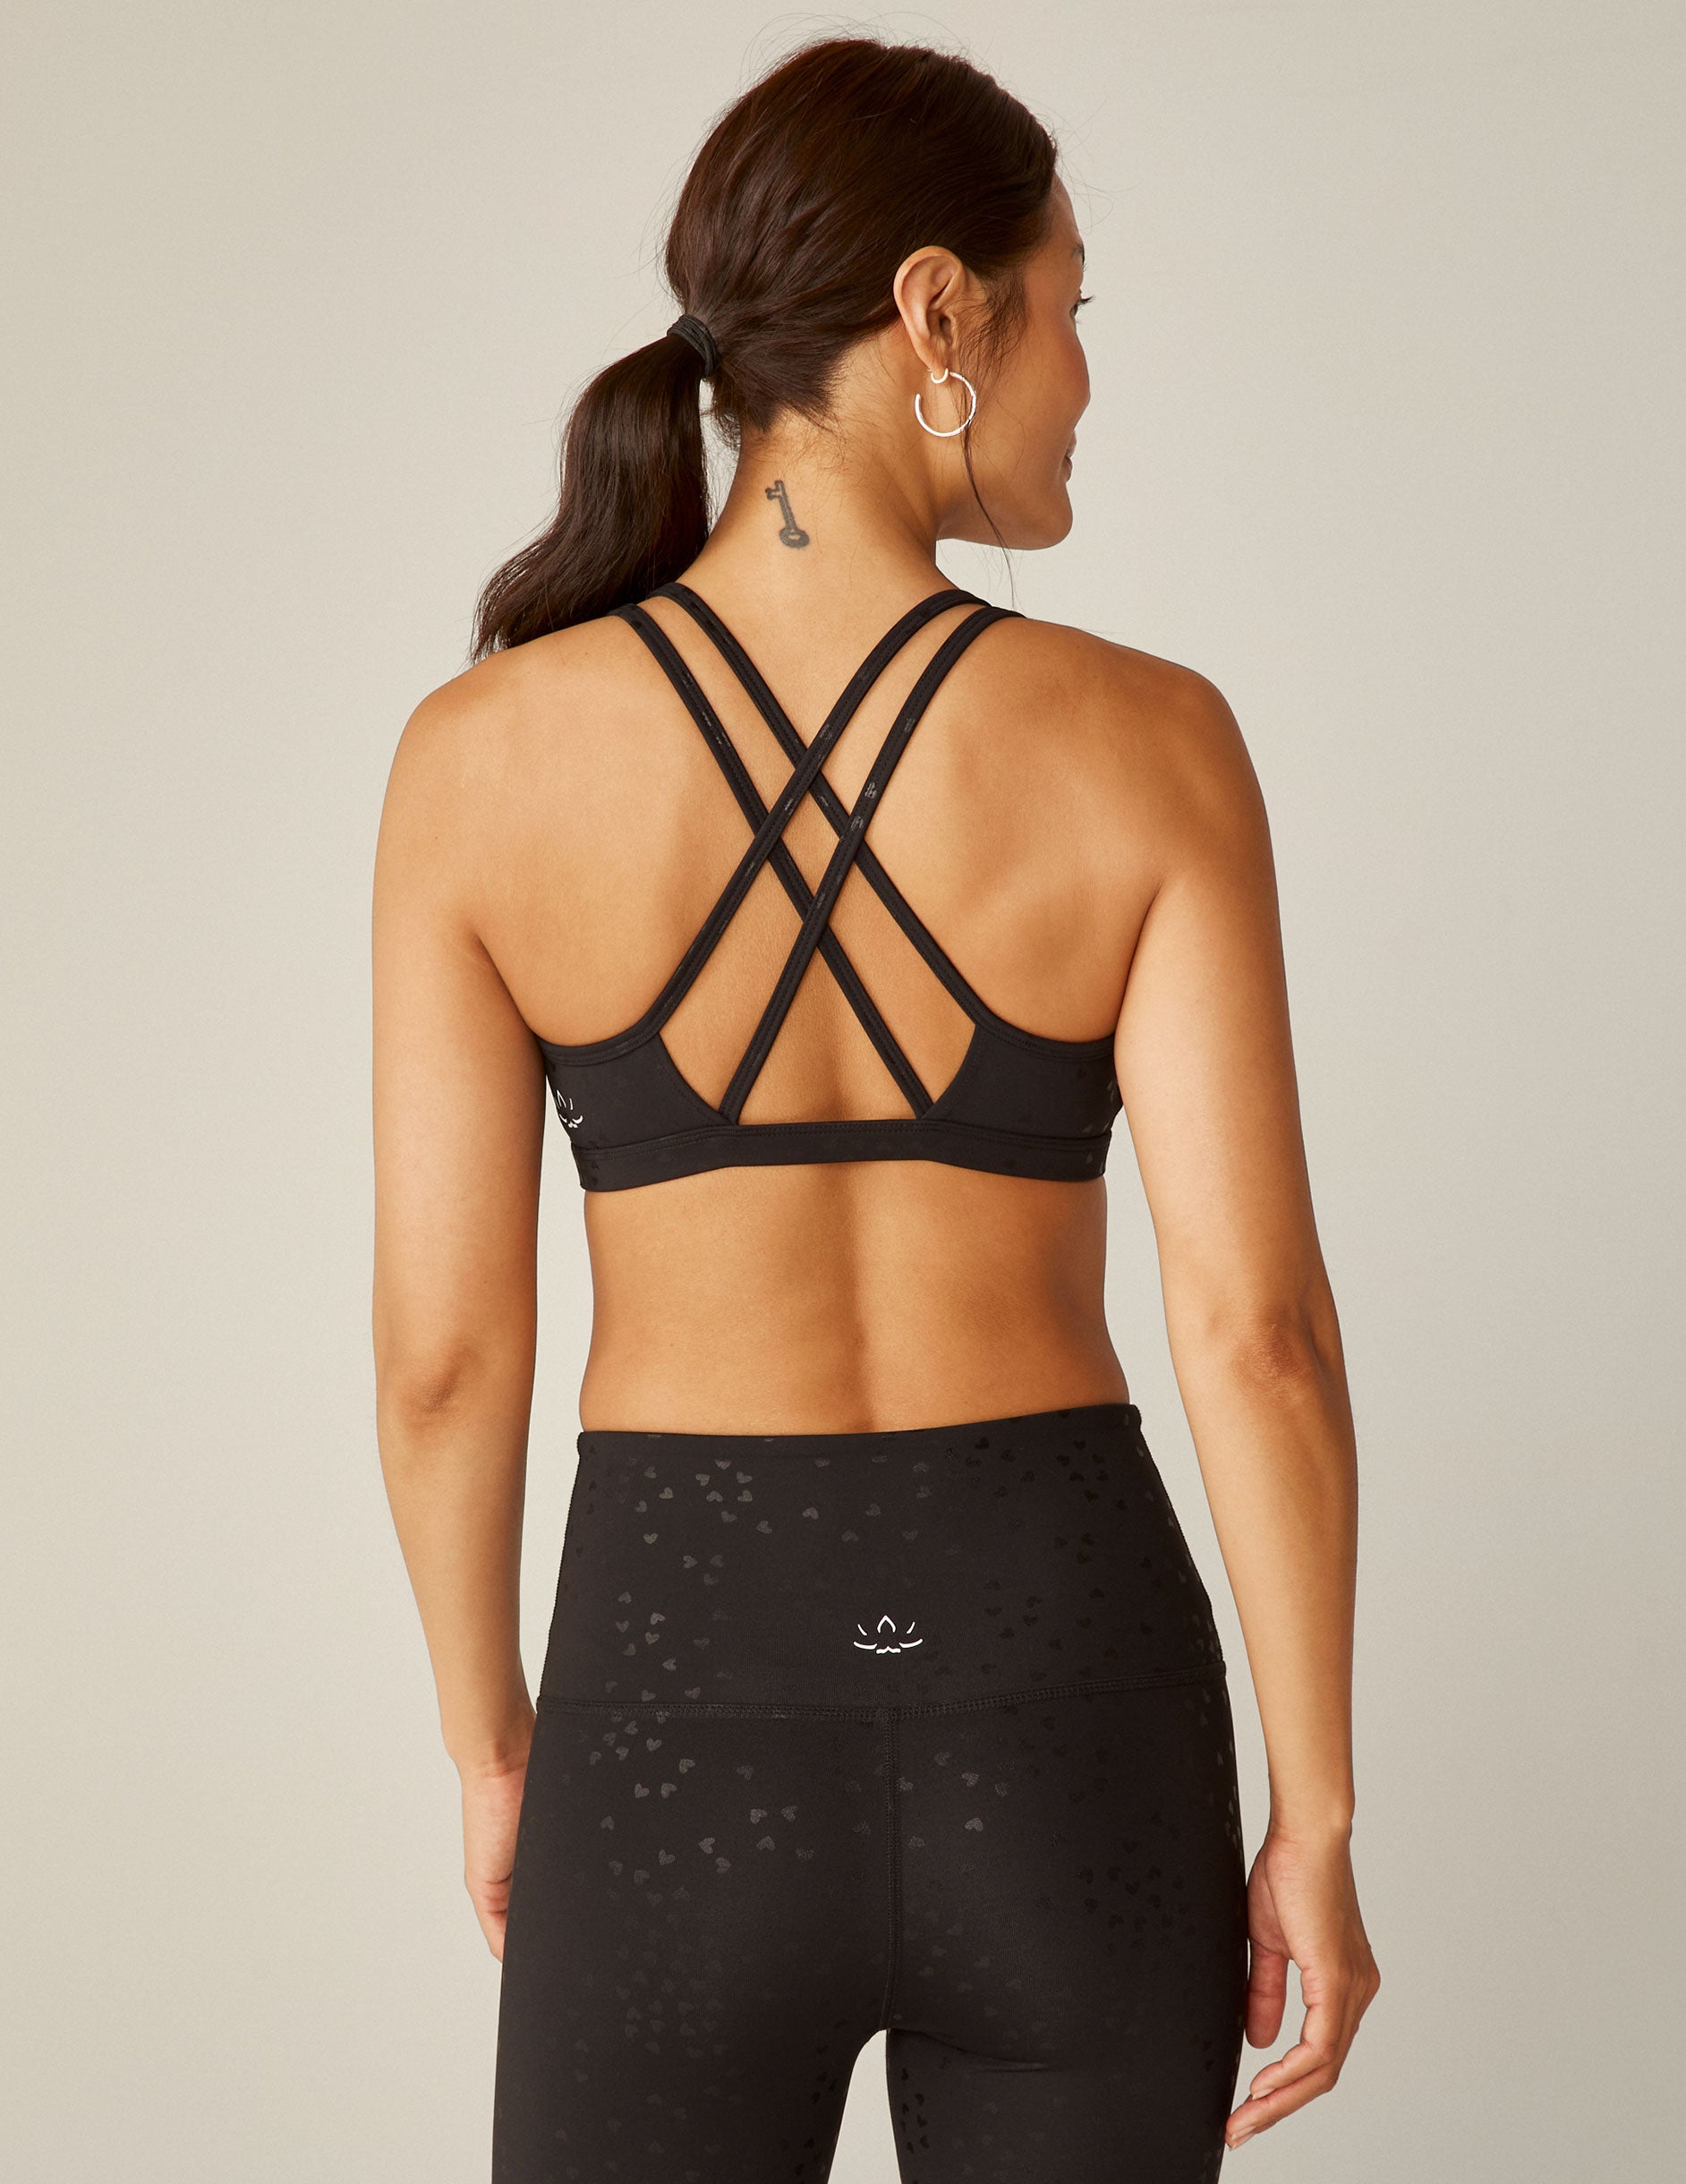 black heart printed double-strapped with a back crossover design sports bra. 